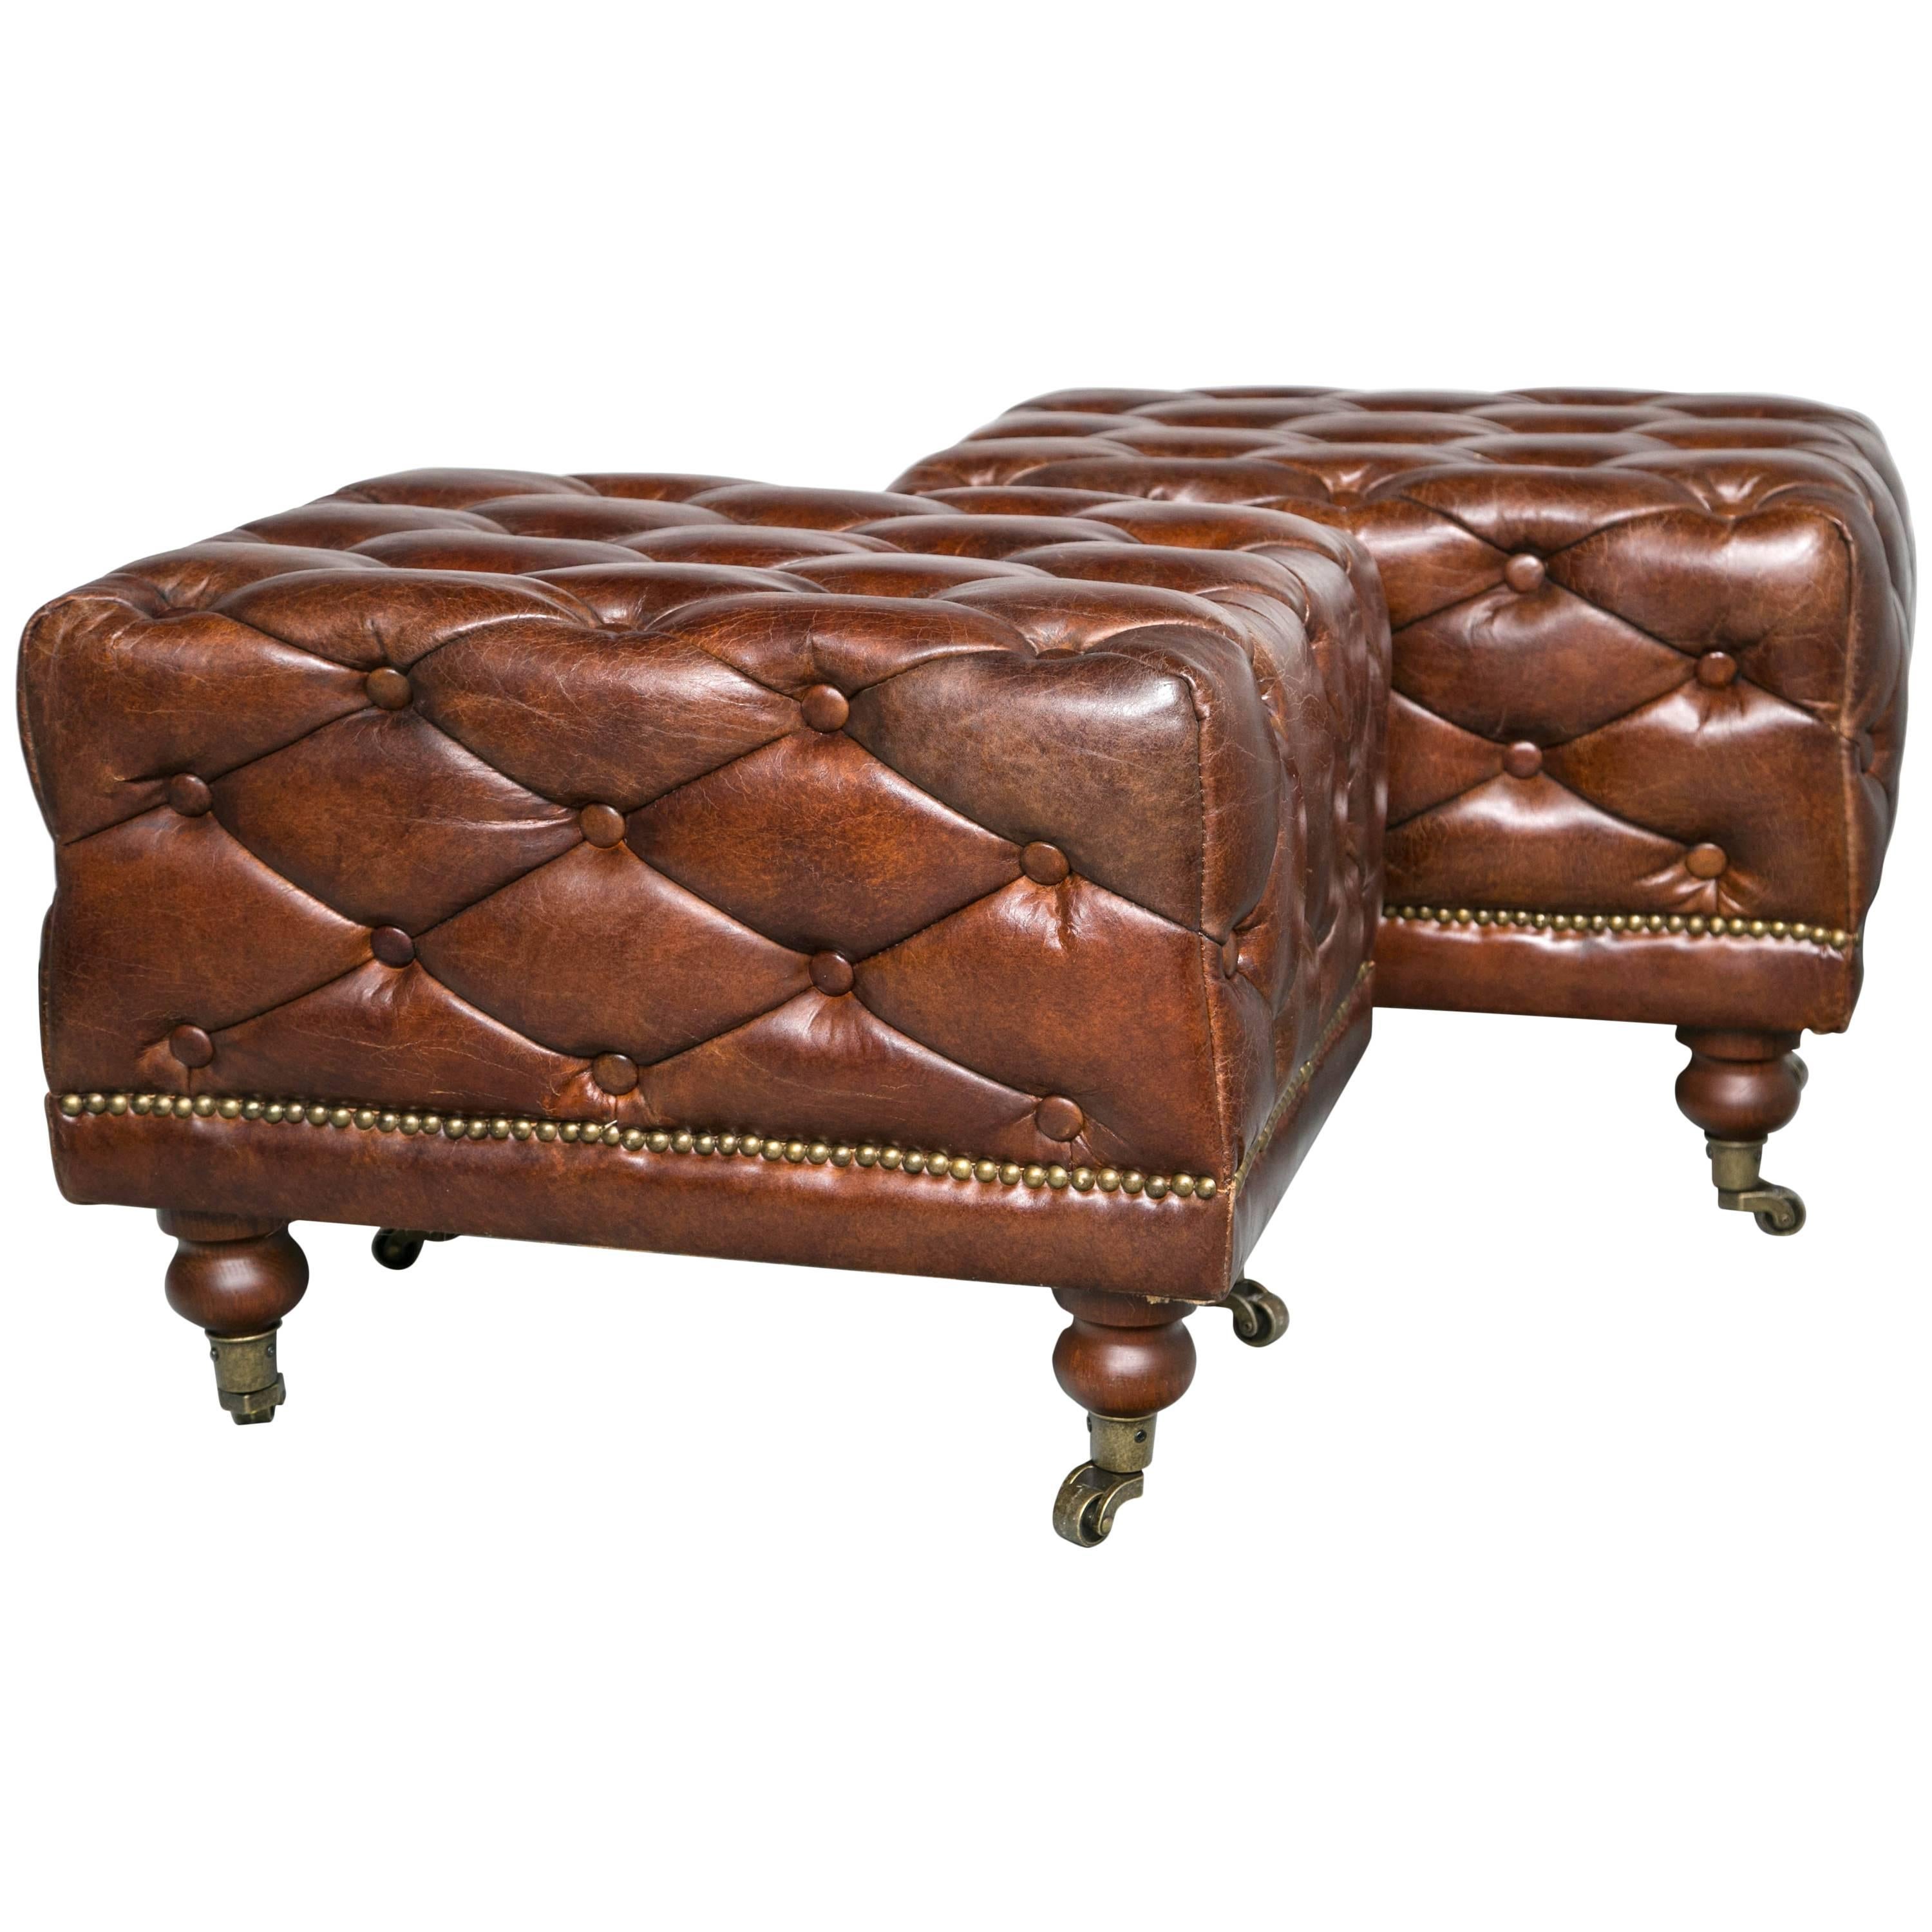 Pair of Tufted Leather Ottomans, Manner of Ralph Lauren